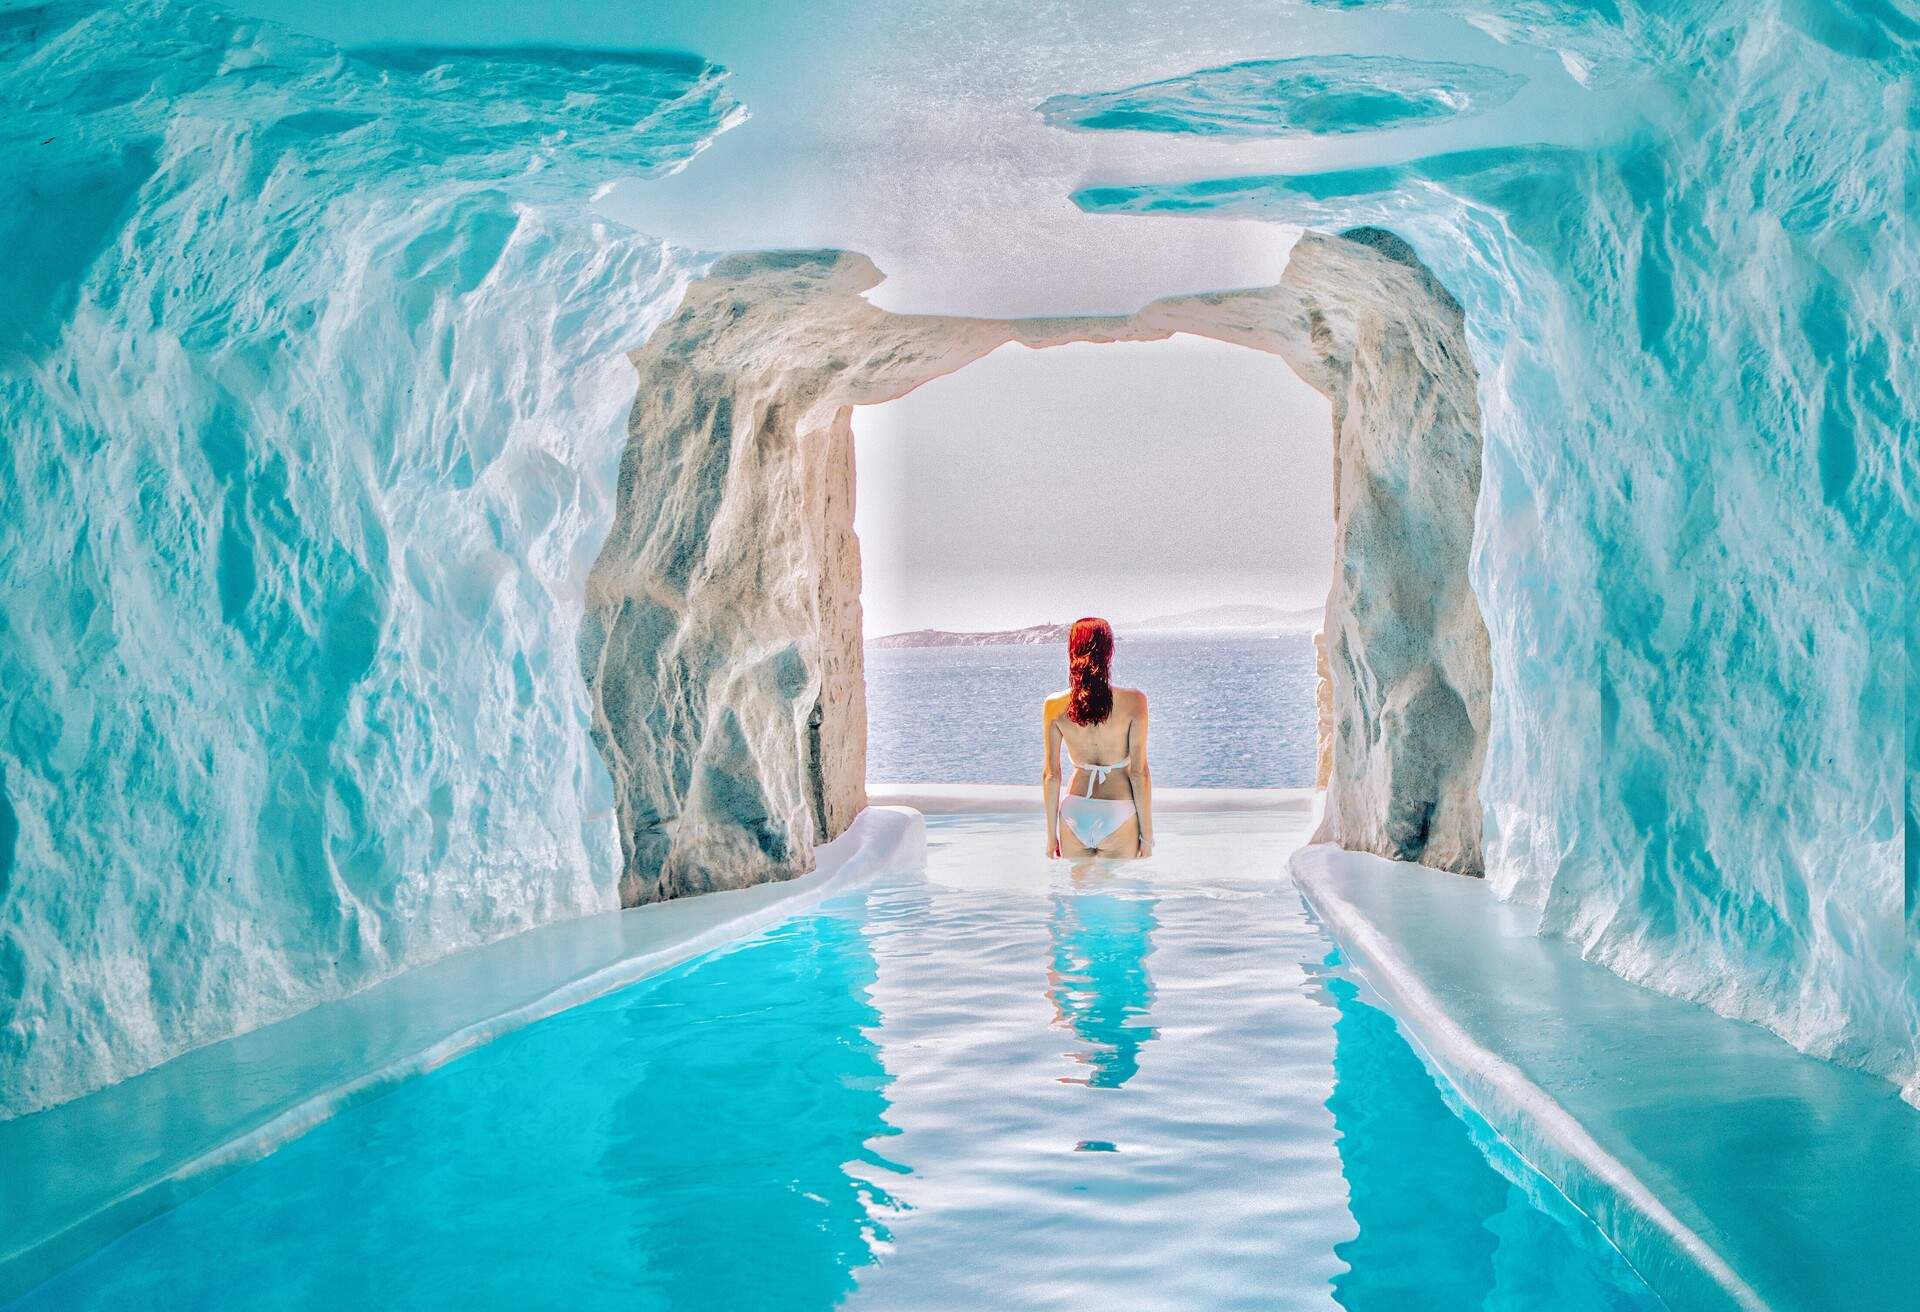 dest_greece_mykonos_theme_people_woman_on_a_cave_pool_gettyimages